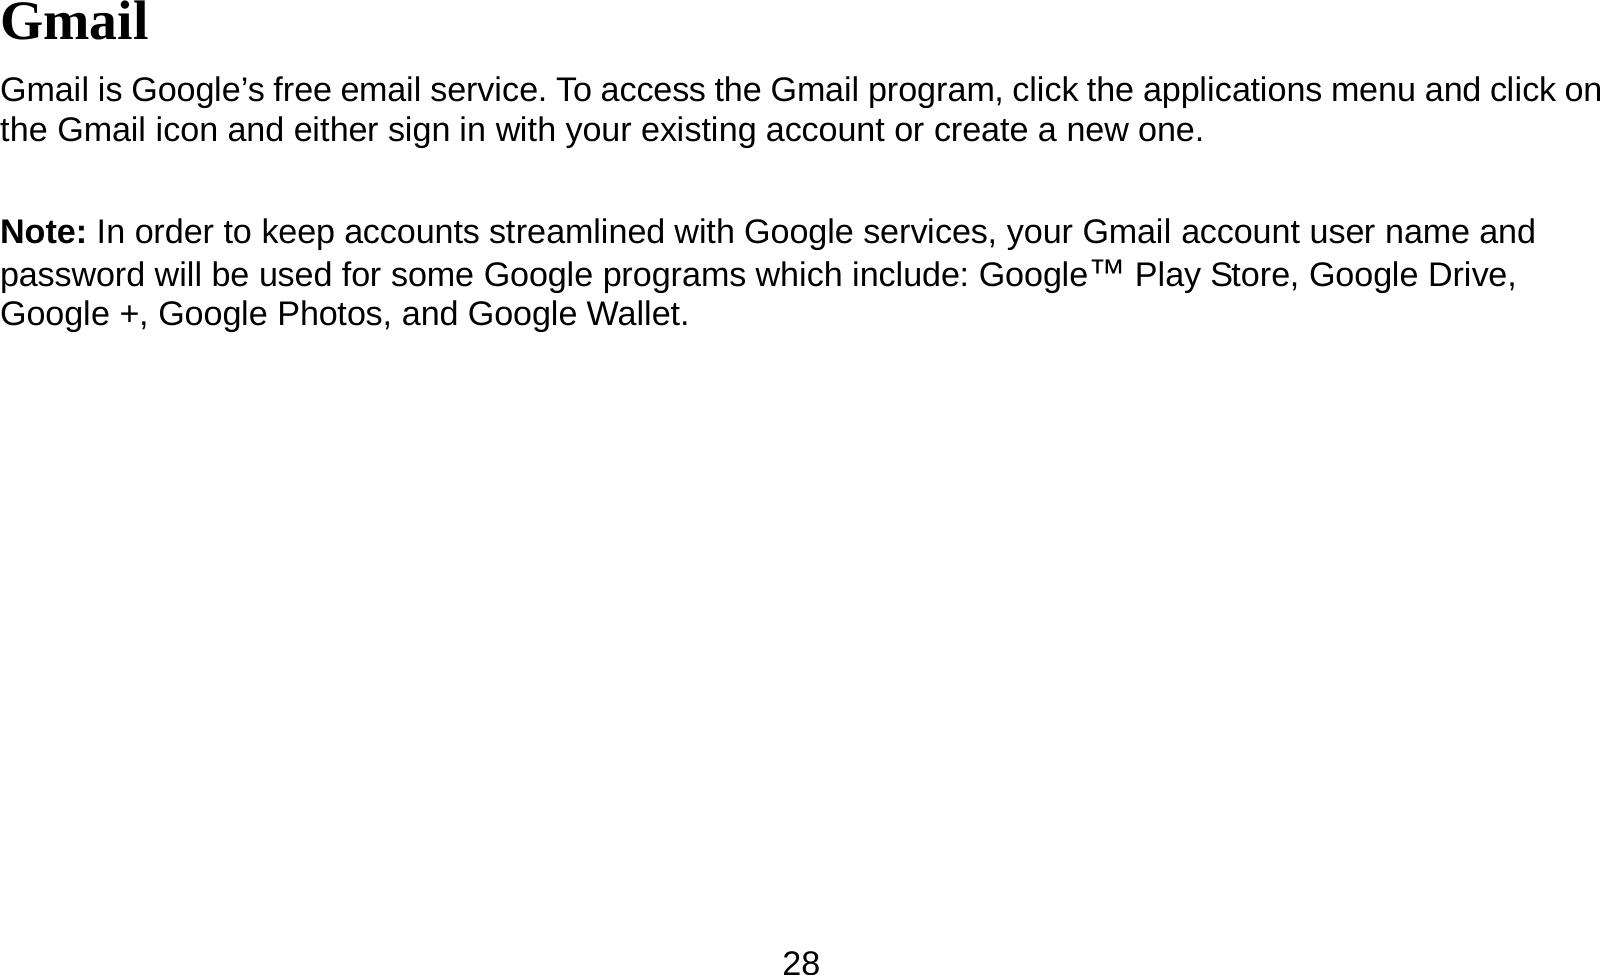   28Gmail Gmail is Google’s free email service. To access the Gmail program, click the applications menu and click on the Gmail icon and either sign in with your existing account or create a new one.    Note: In order to keep accounts streamlined with Google services, your Gmail account user name and password will be used for some Google programs which include: Google™ Play Store, Google Drive, Google +, Google Photos, and Google Wallet.   